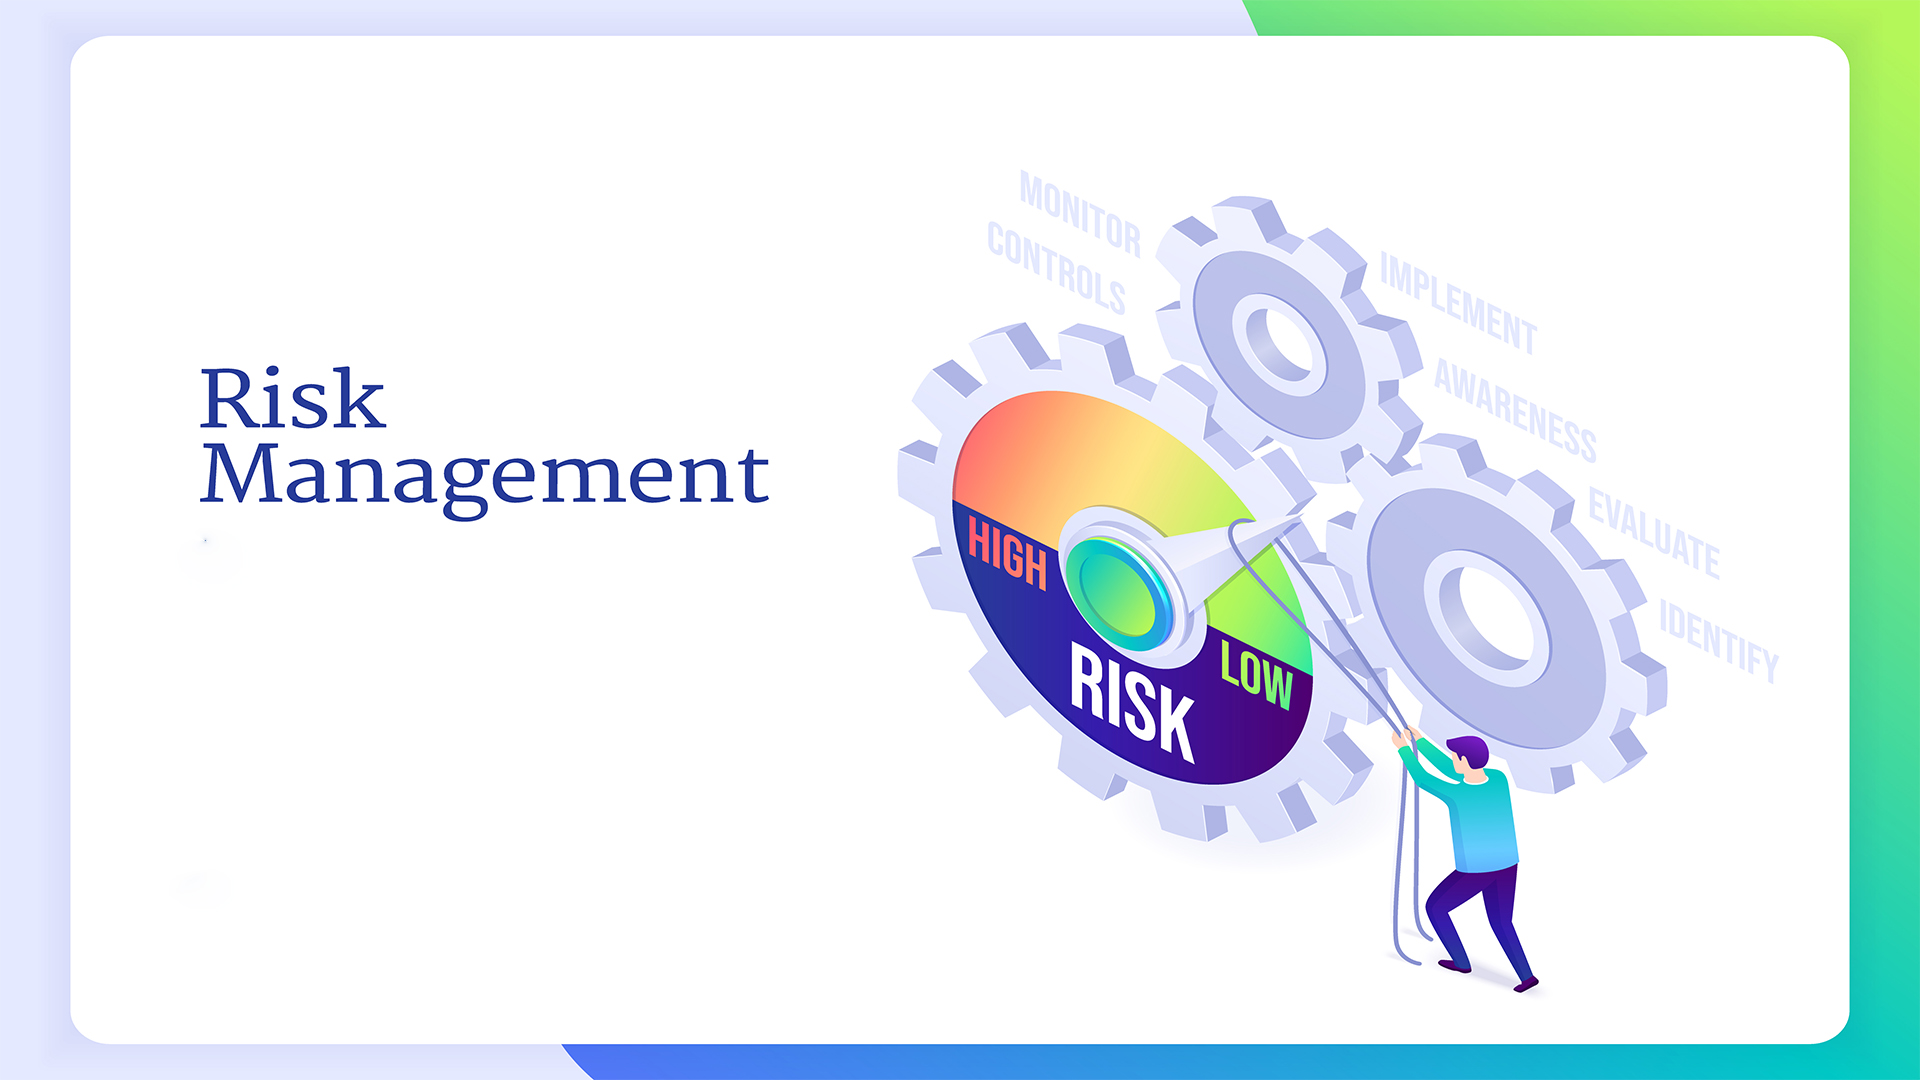 Project Risk Management Strategies & Solutions